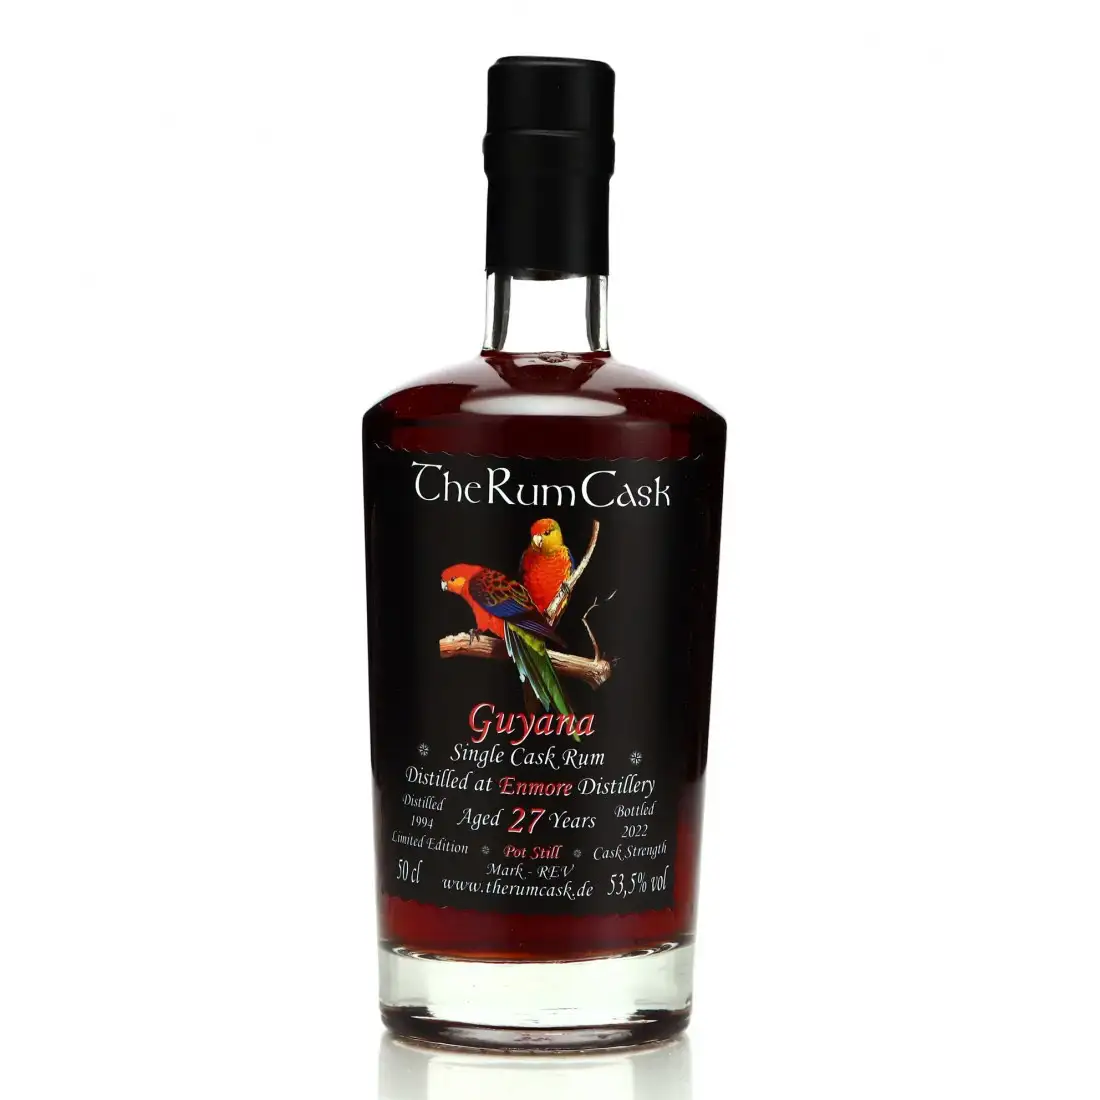 Image of the front of the bottle of the rum Guyana Single Cask Rum REV